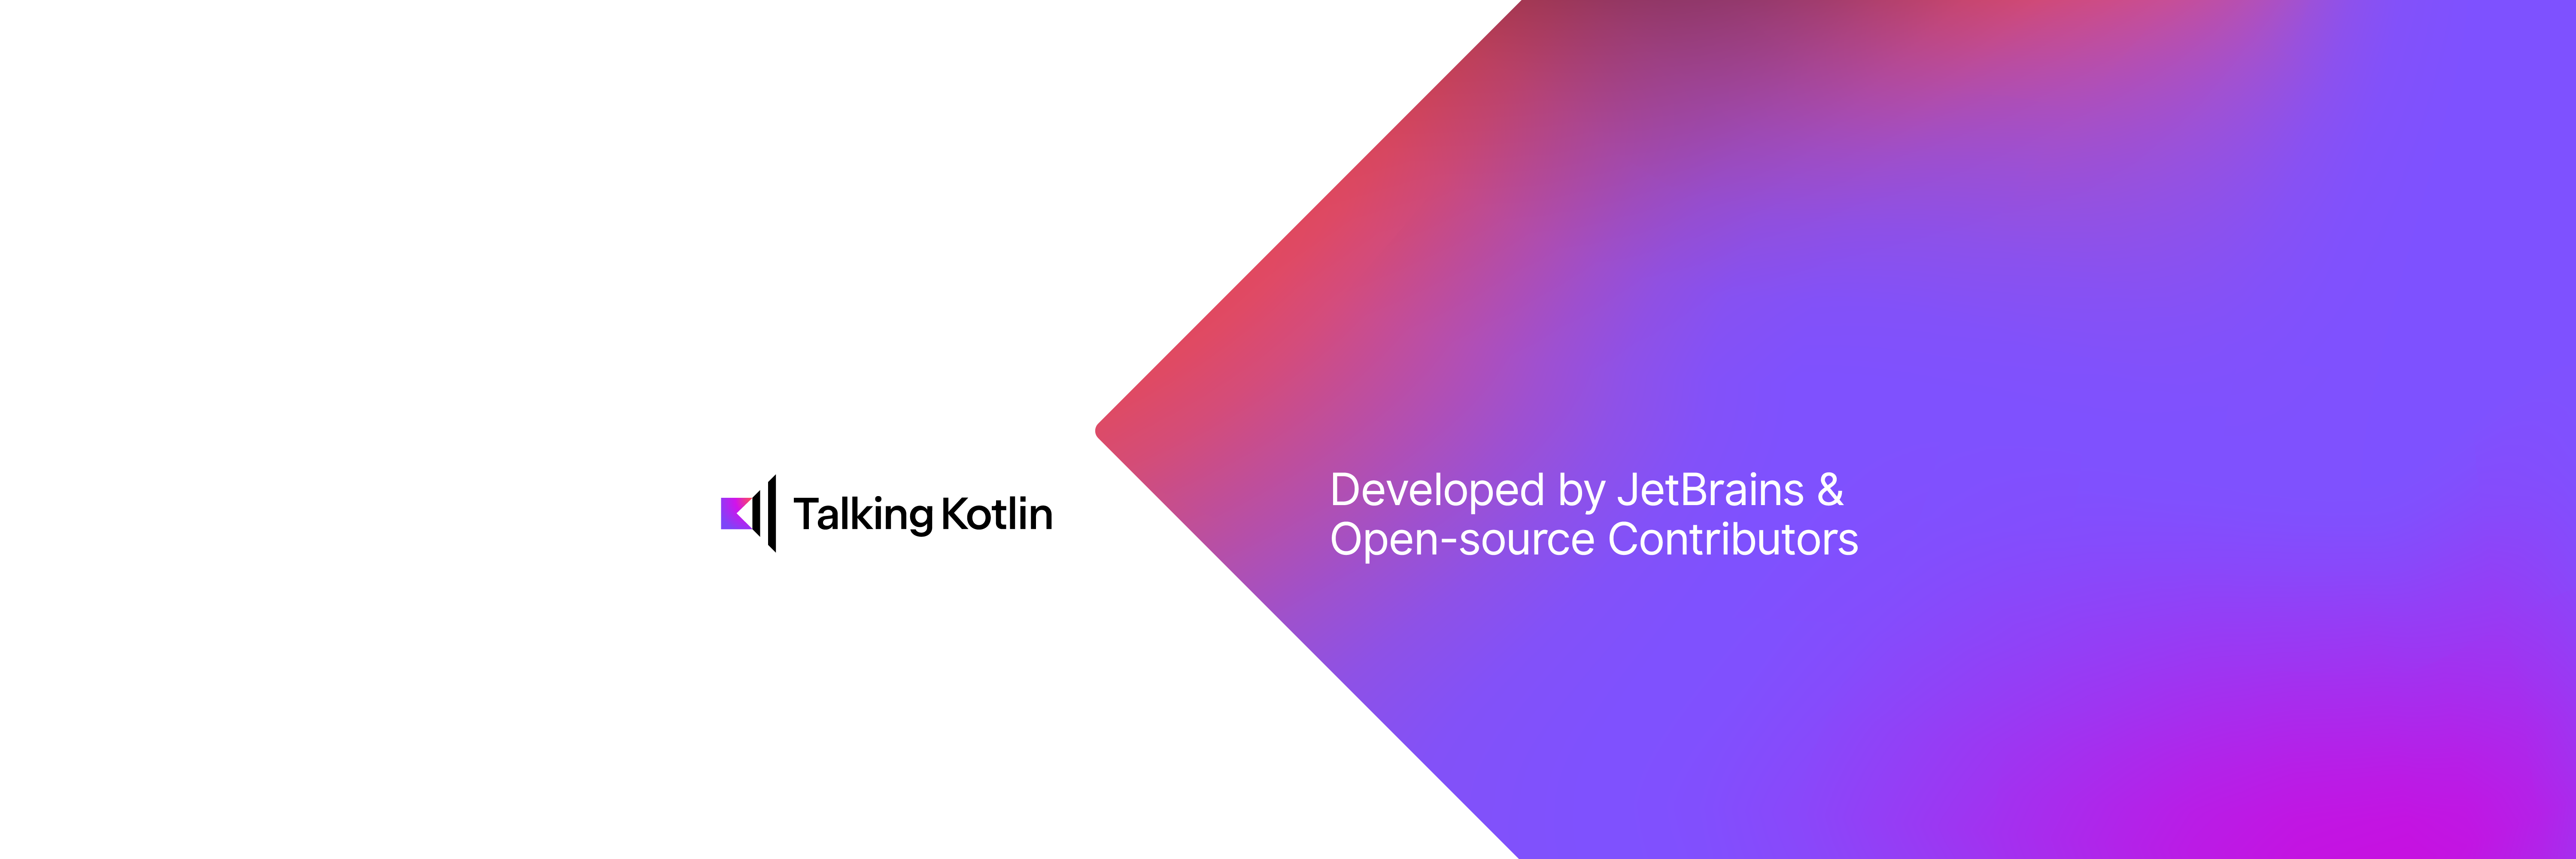 Moving 1M users to Kotlin and Compose